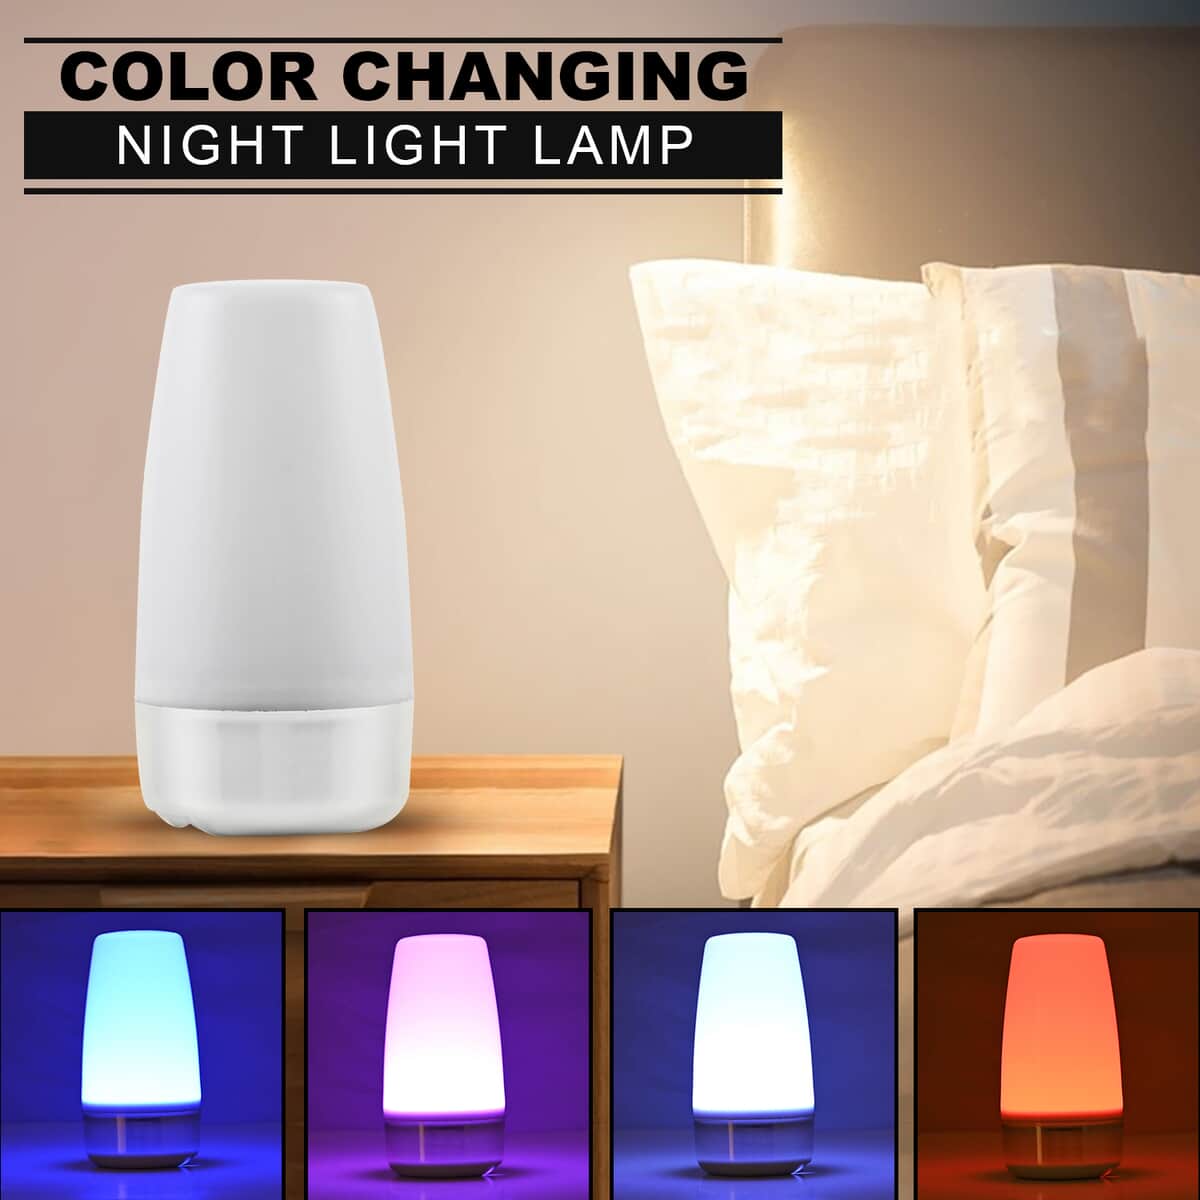 Color Changing Night Light Lamp (3xAAA Batteries) image number 1